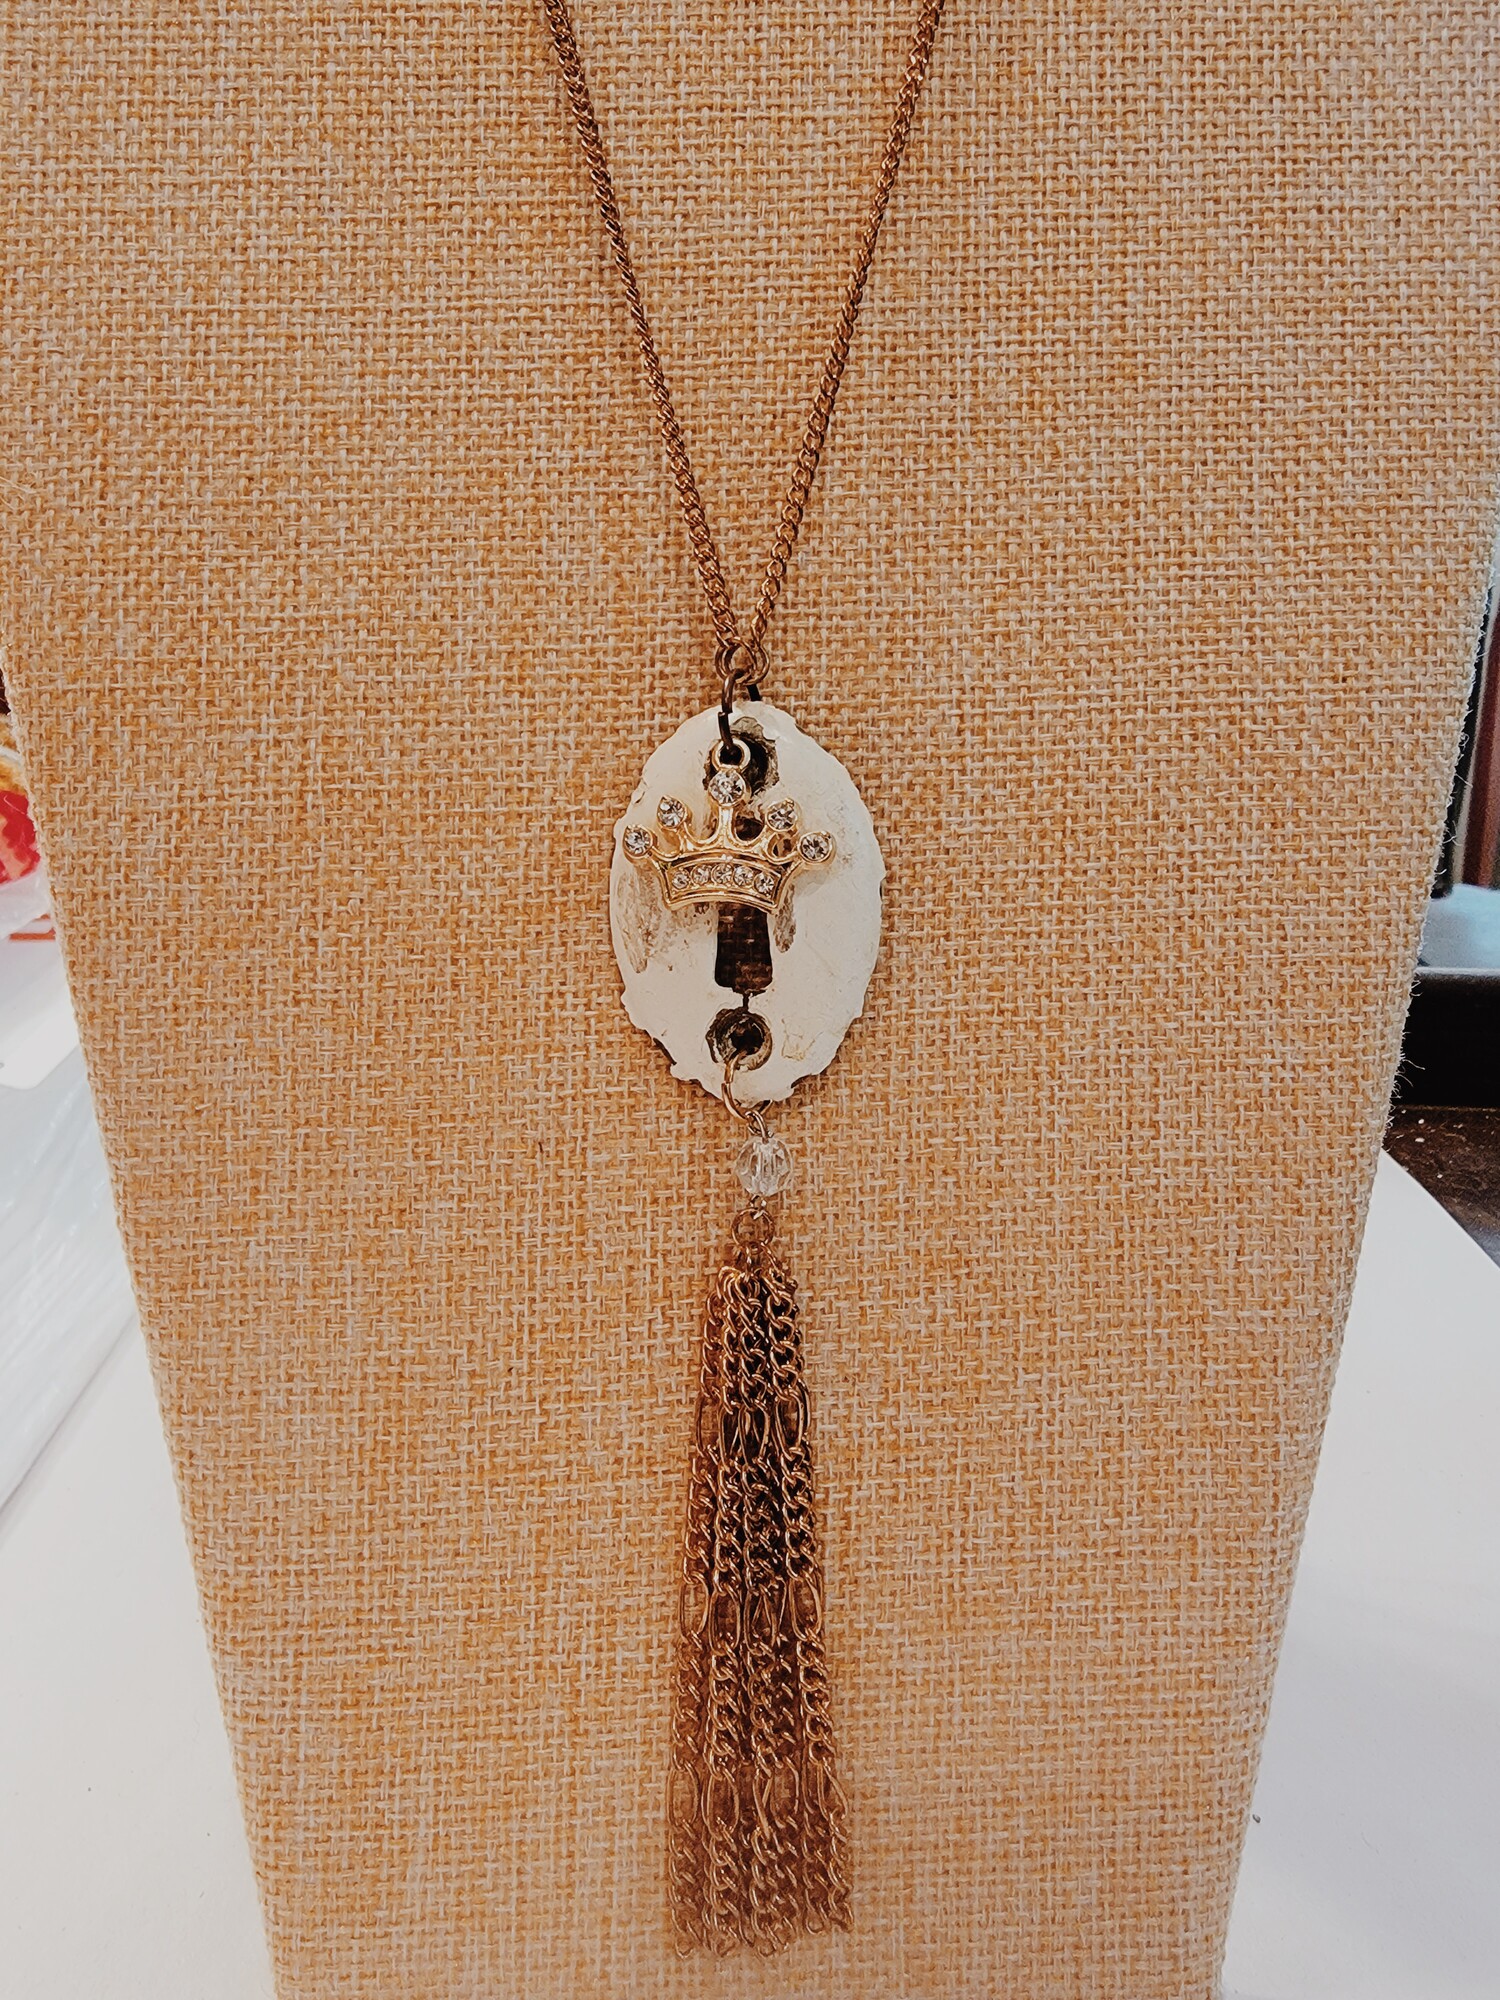 This adorable Kelli Hawk Designs necklace is on a 25 inch chain with a 2 inch extender and has a vintage keyhole as the pendant. The gold crown and gold chain tassel are so unique and perfect for a one of a kind look!